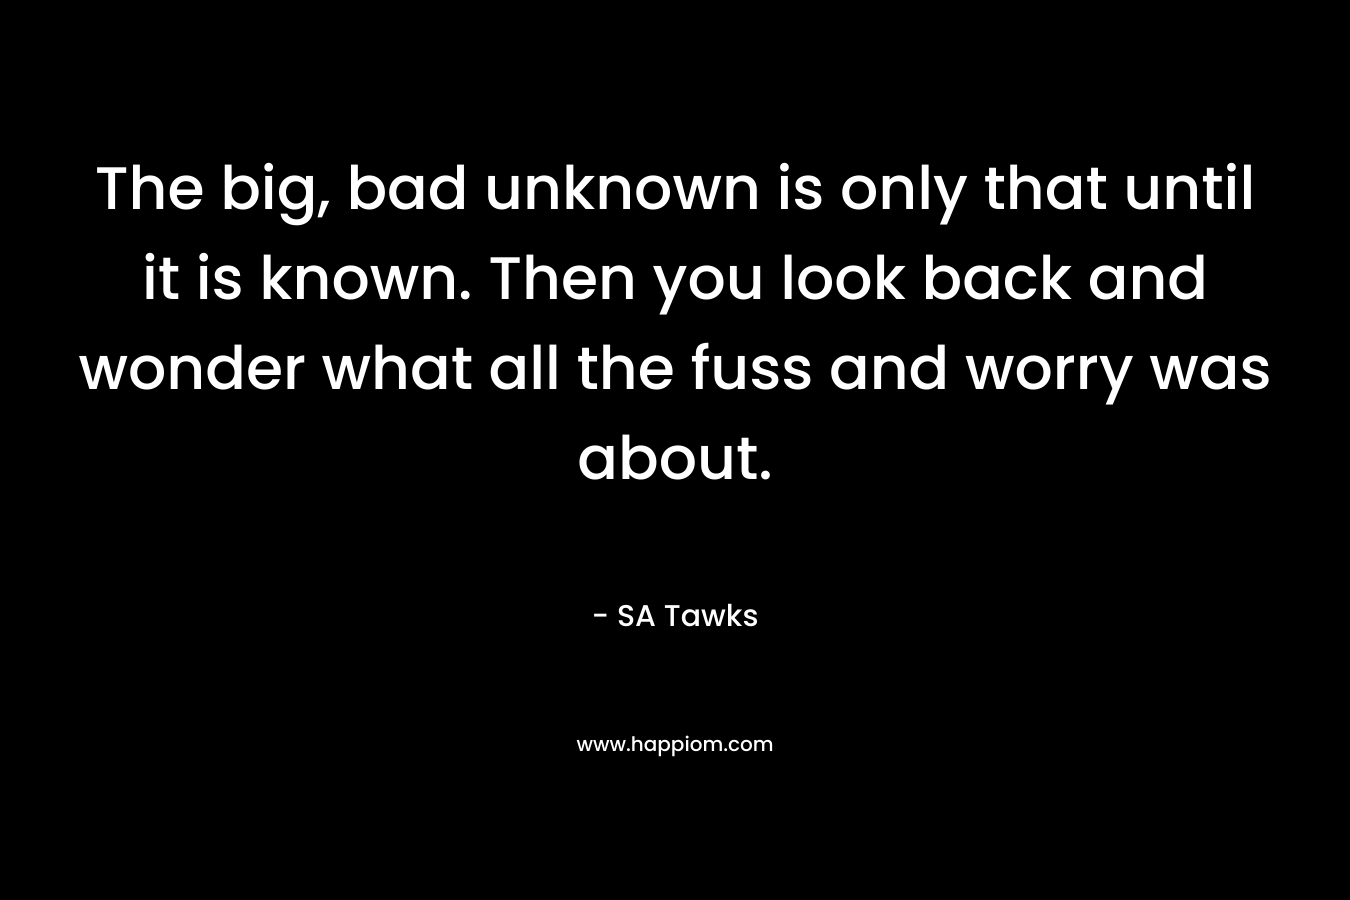 The big, bad unknown is only that until it is known. Then you look back and wonder what all the fuss and worry was about. – SA Tawks